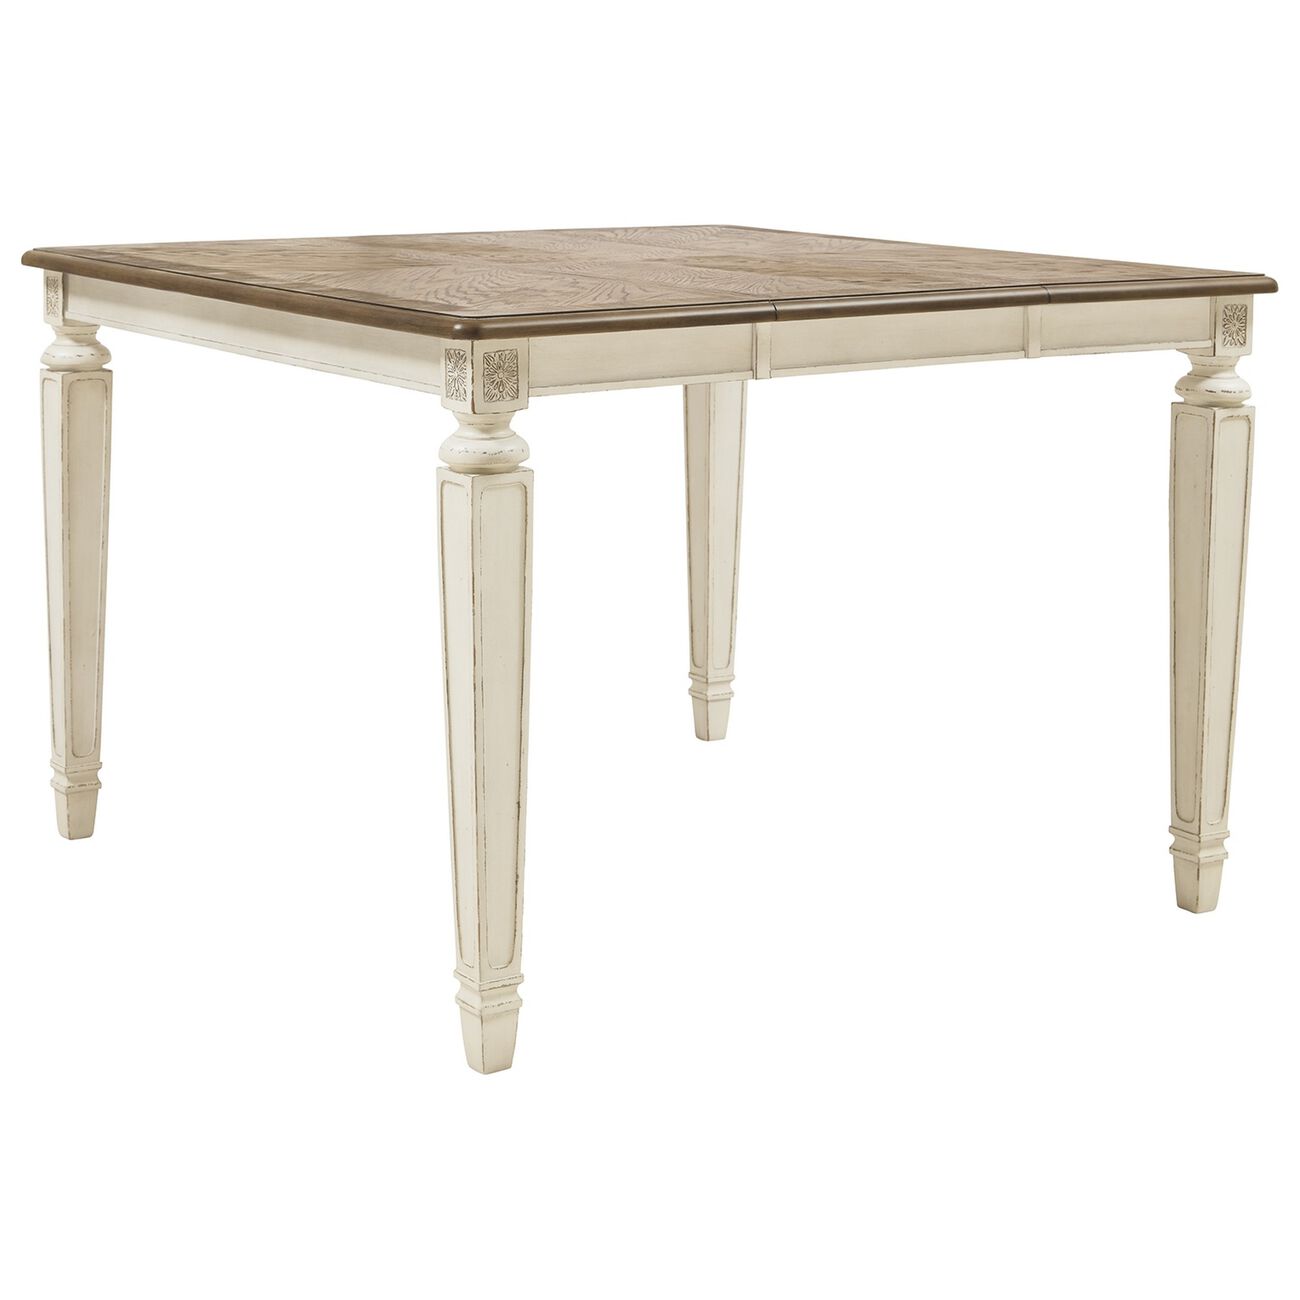 Square Wooden Extendable Counter Height Table, Antique White and Brown